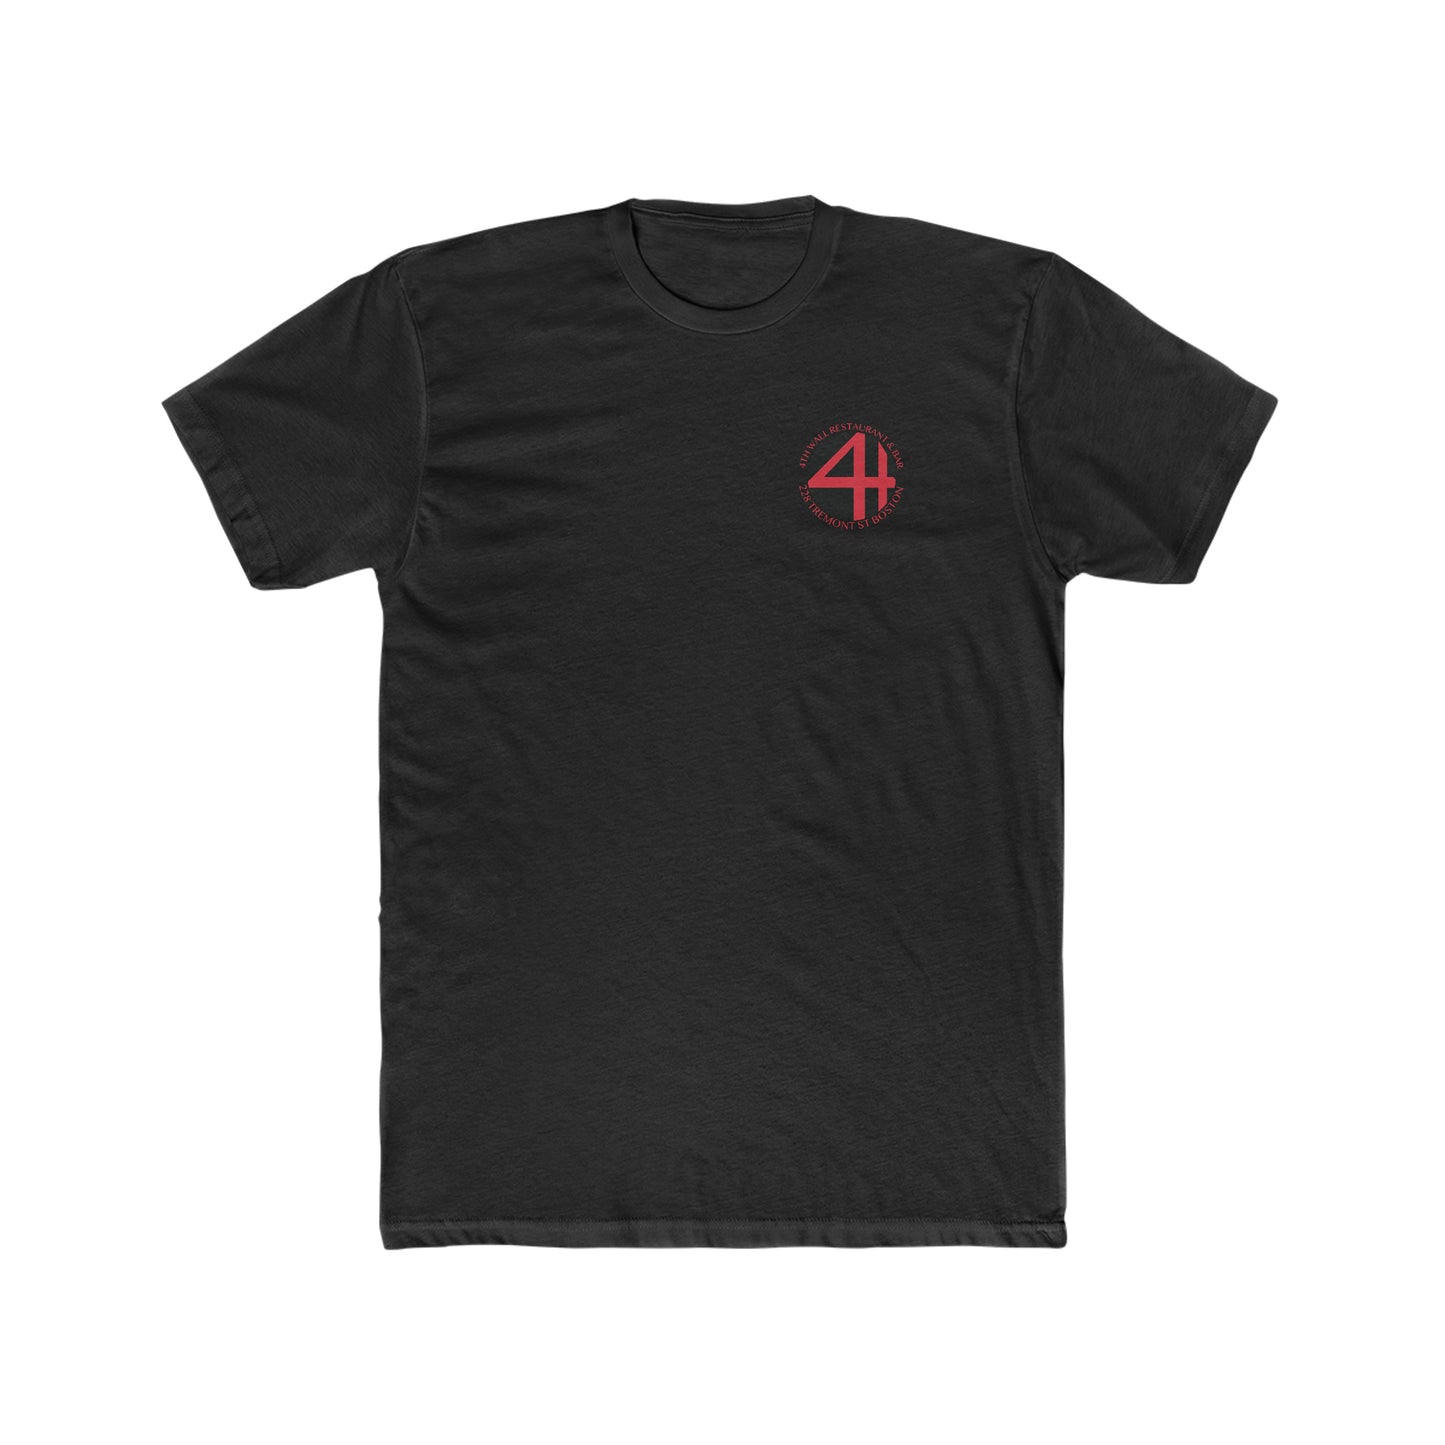 4th Wall Cotton Tee